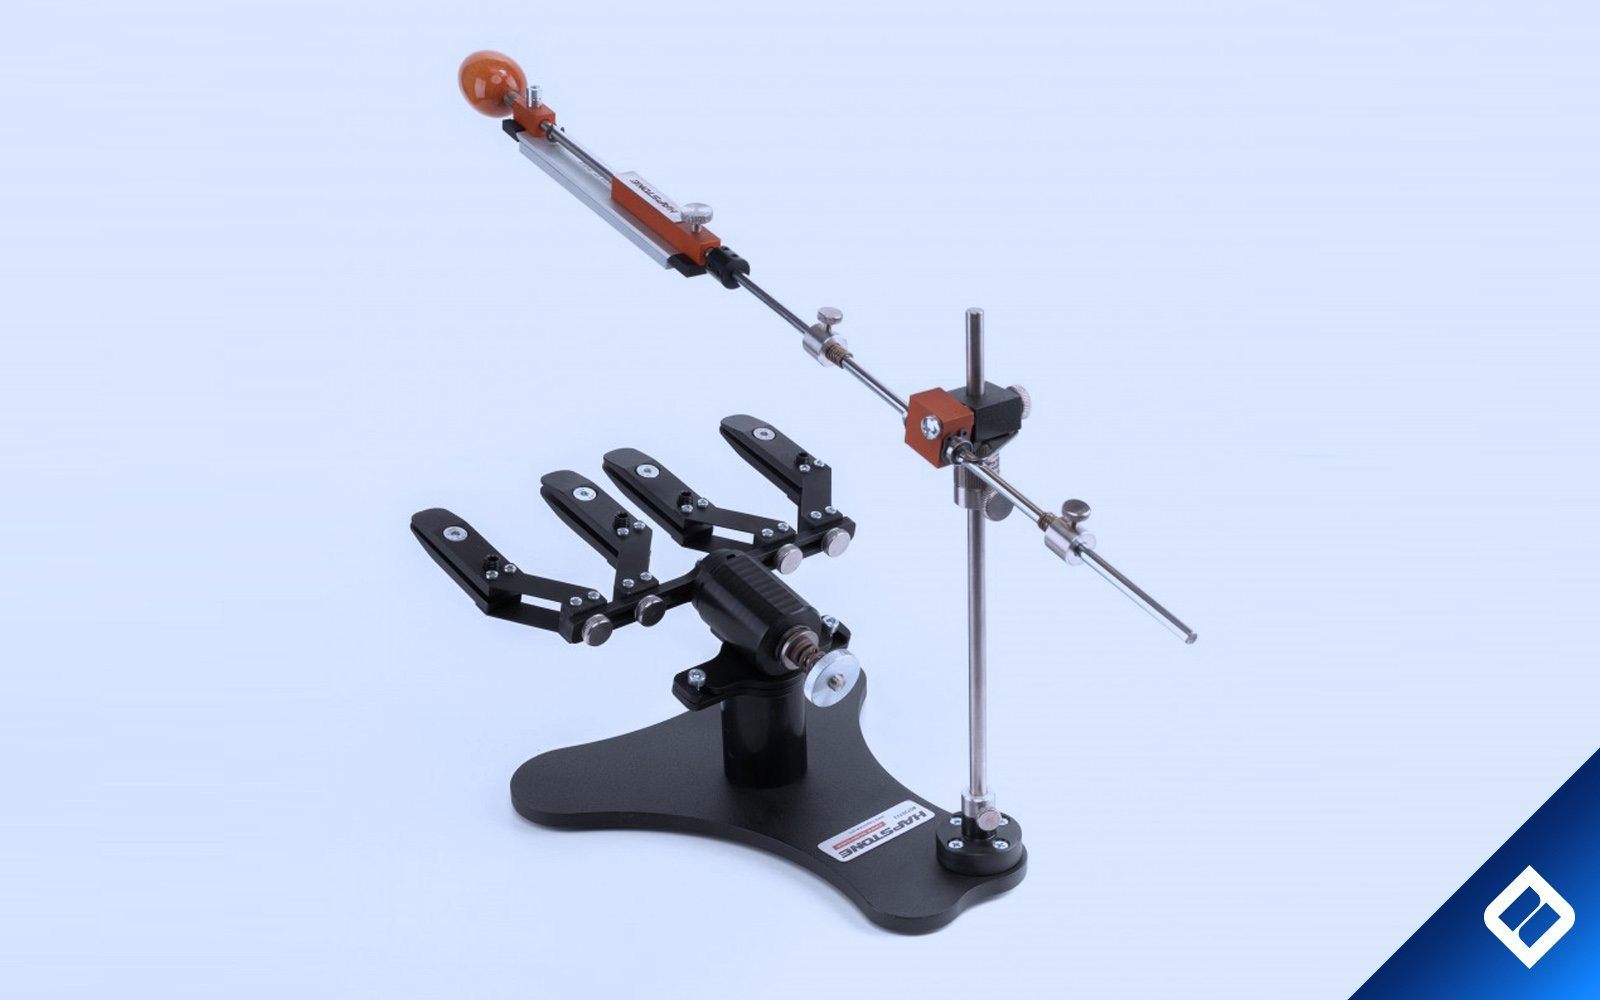 Hapstone Modular sharpening system with guide rod and clamps